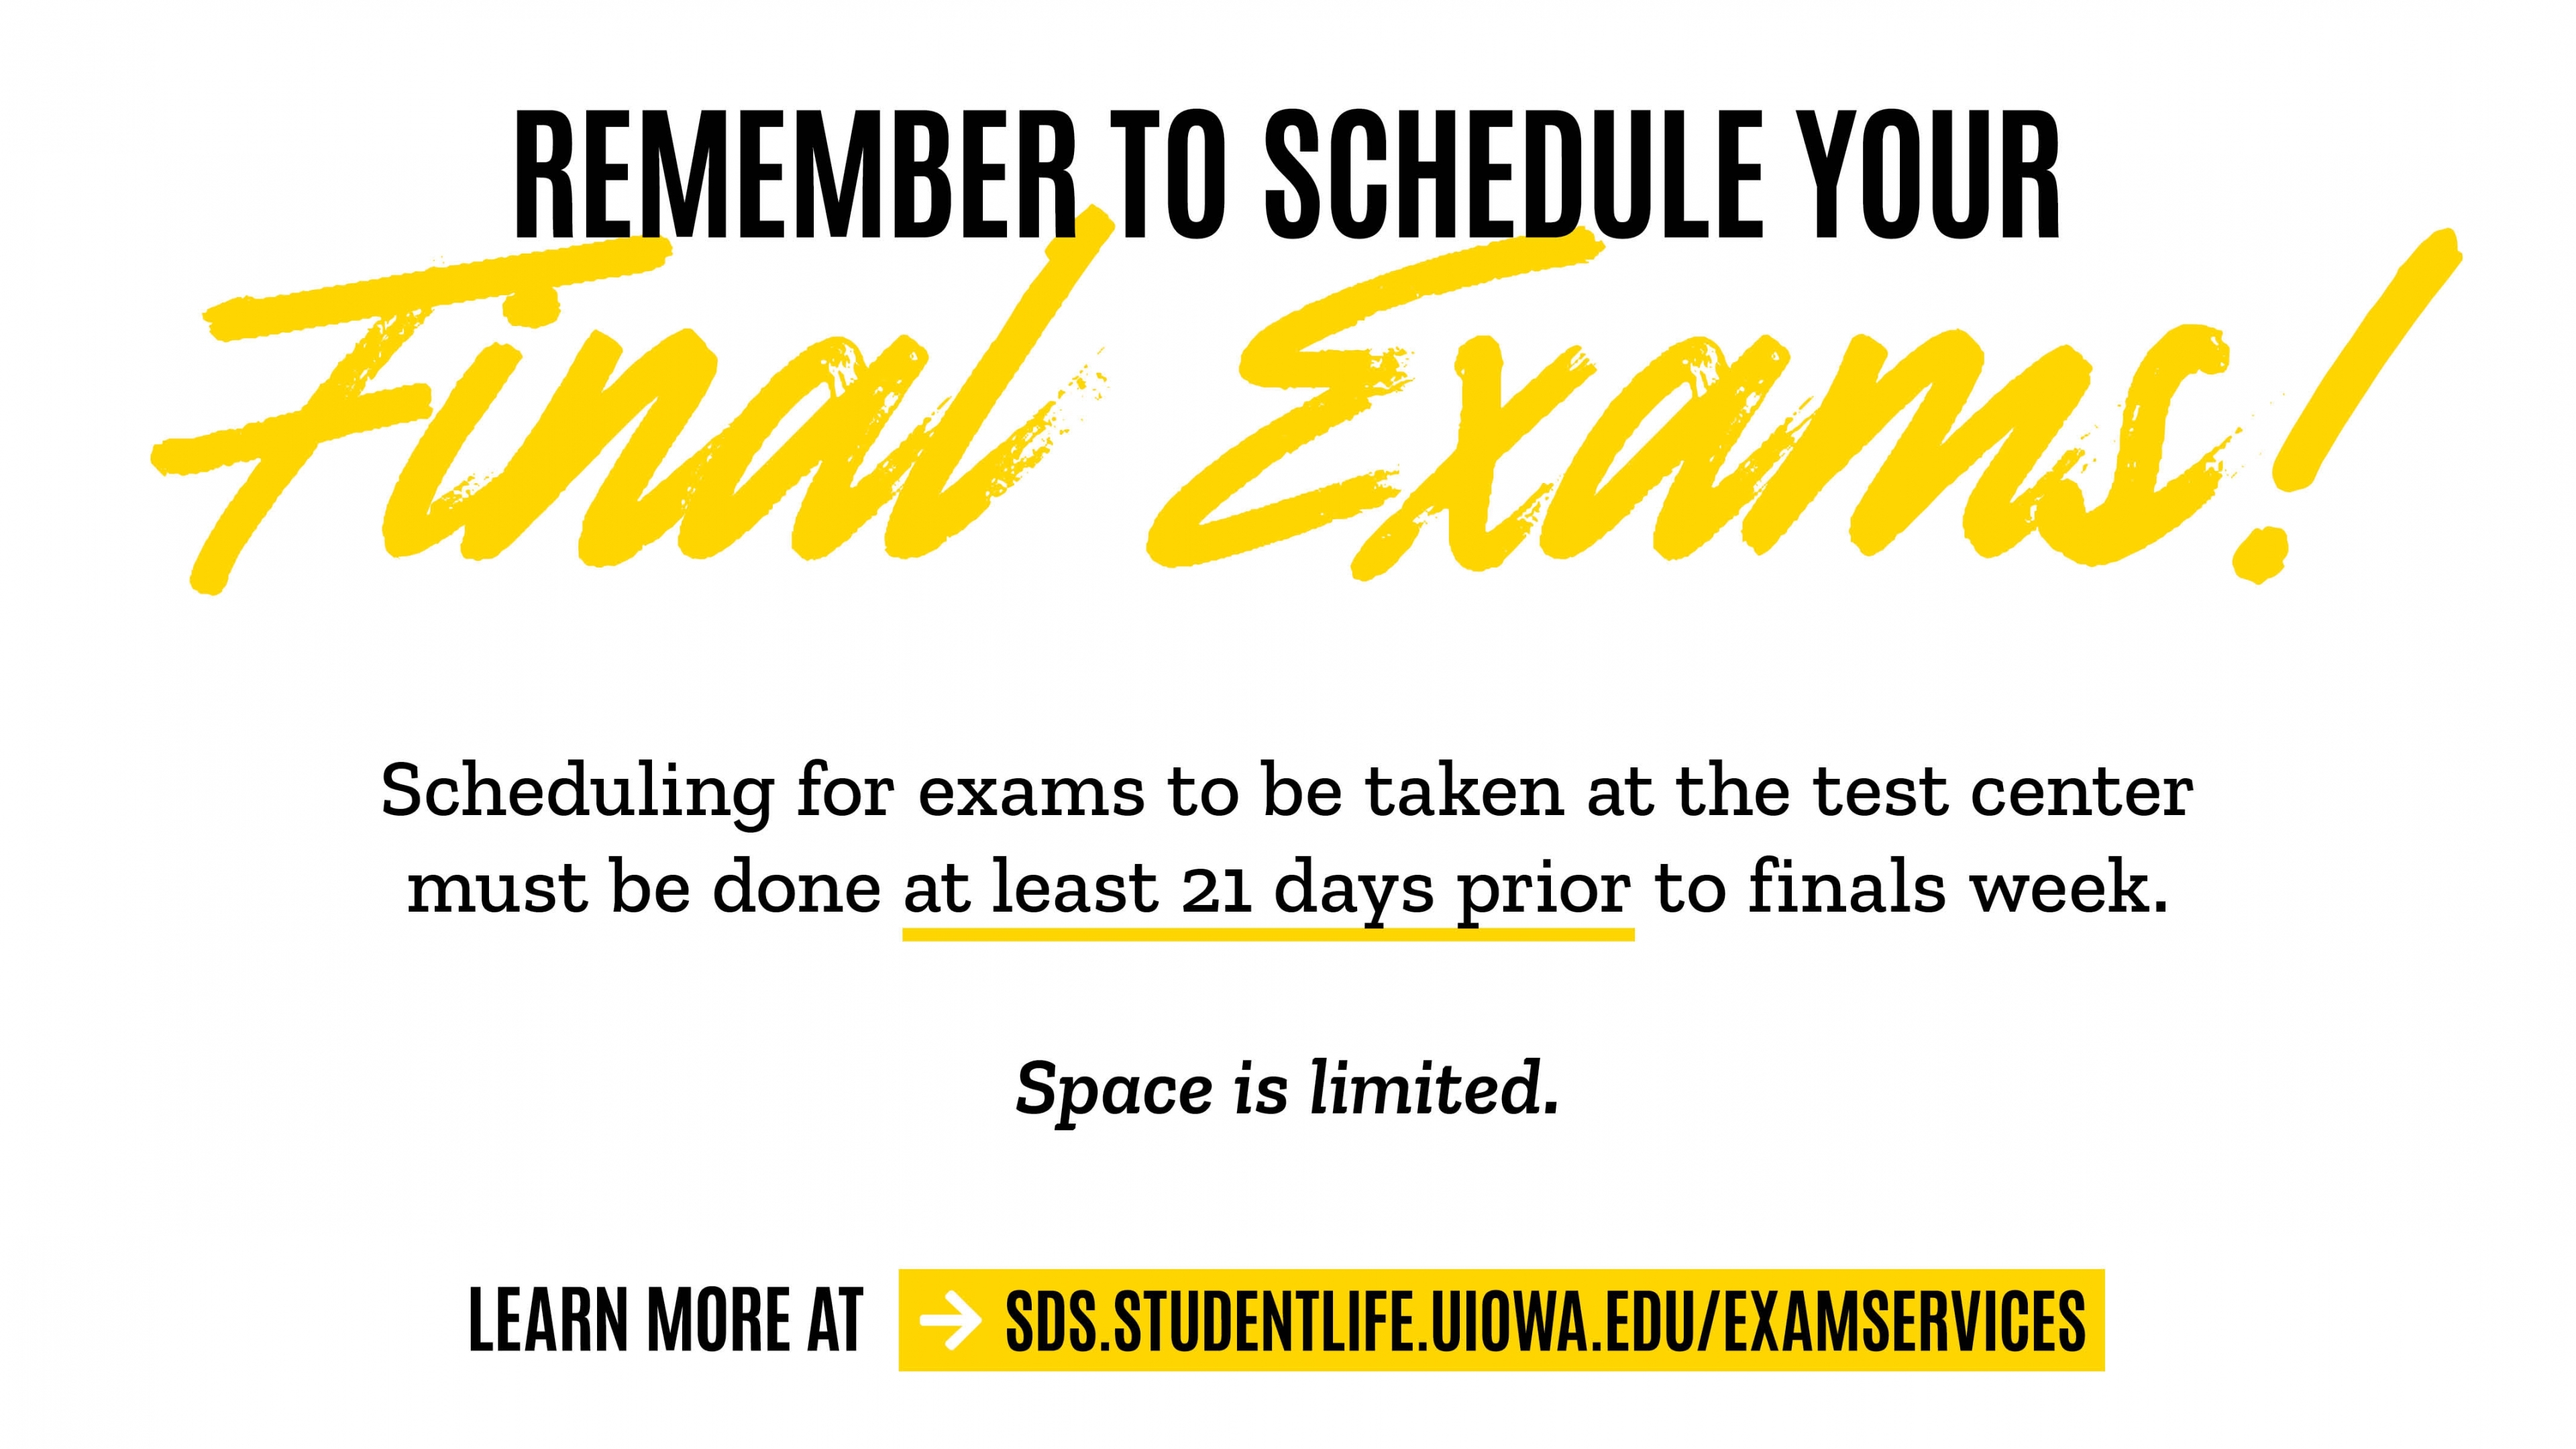 Final Exams Reminder to schedule 21 days before